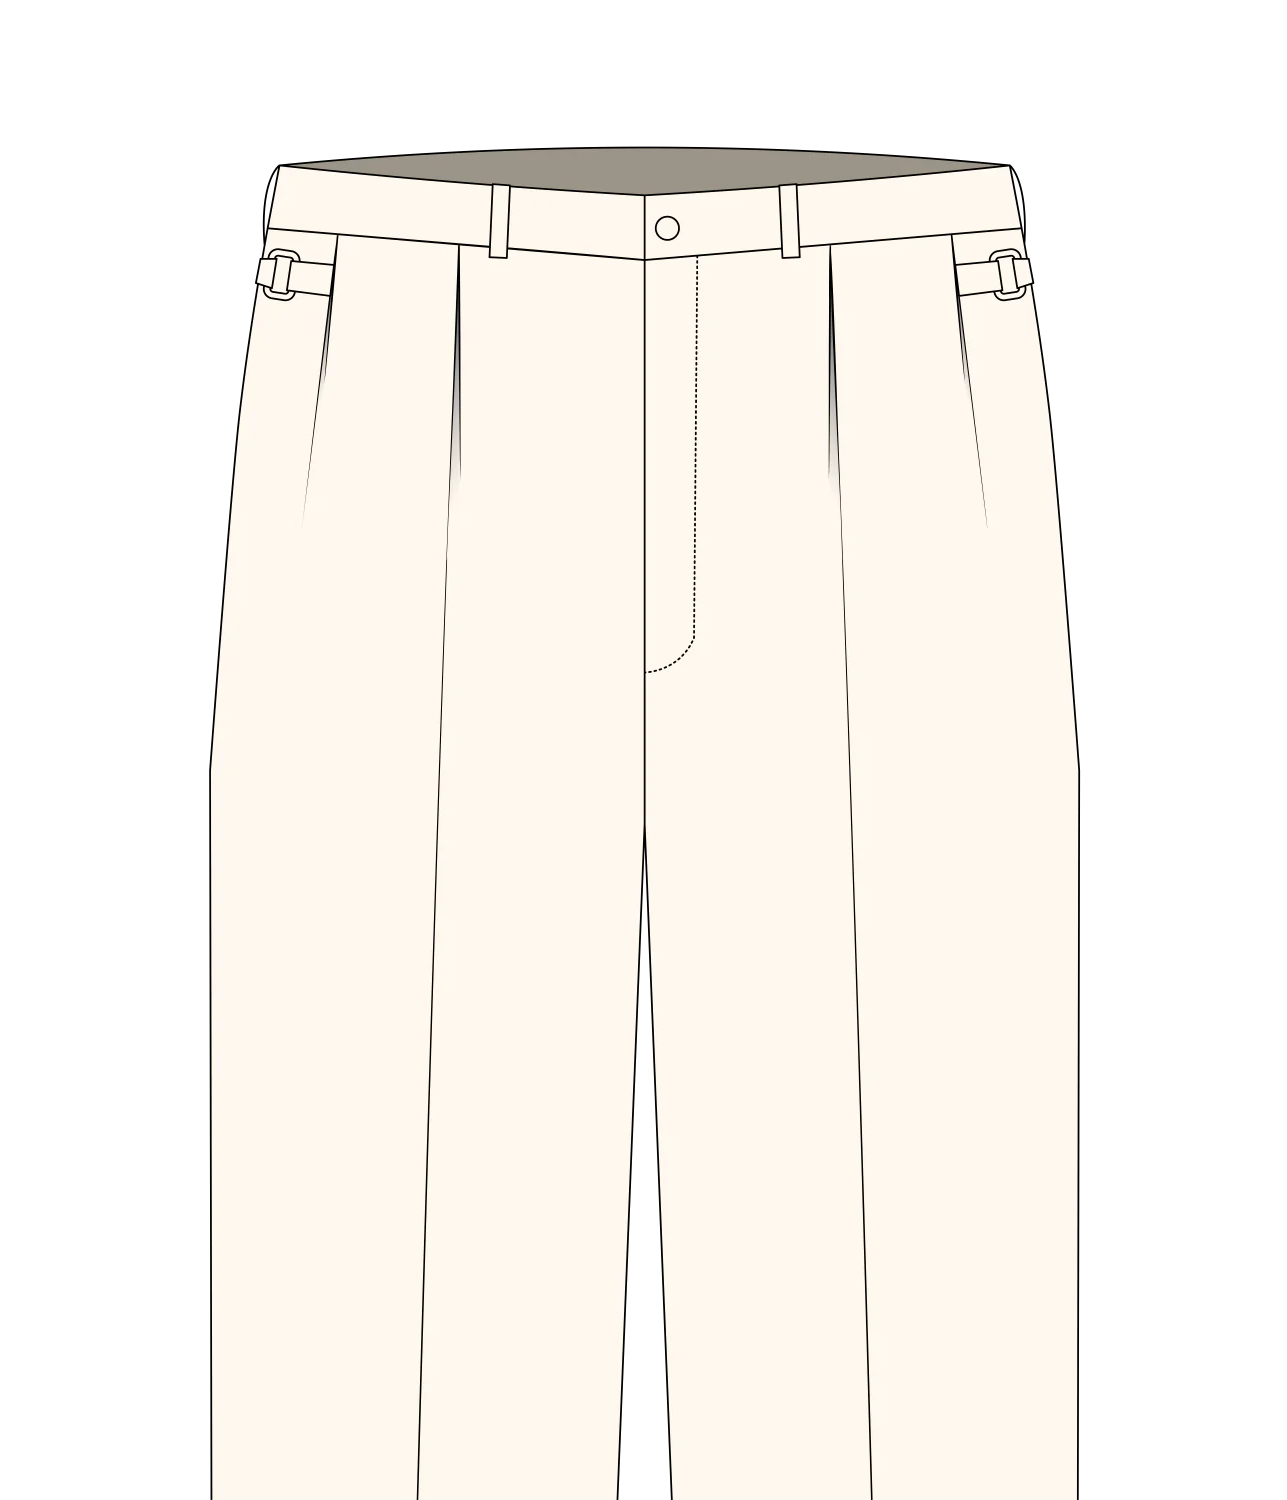 How to Draft Trouser Pockets | Blog | Oliver + S